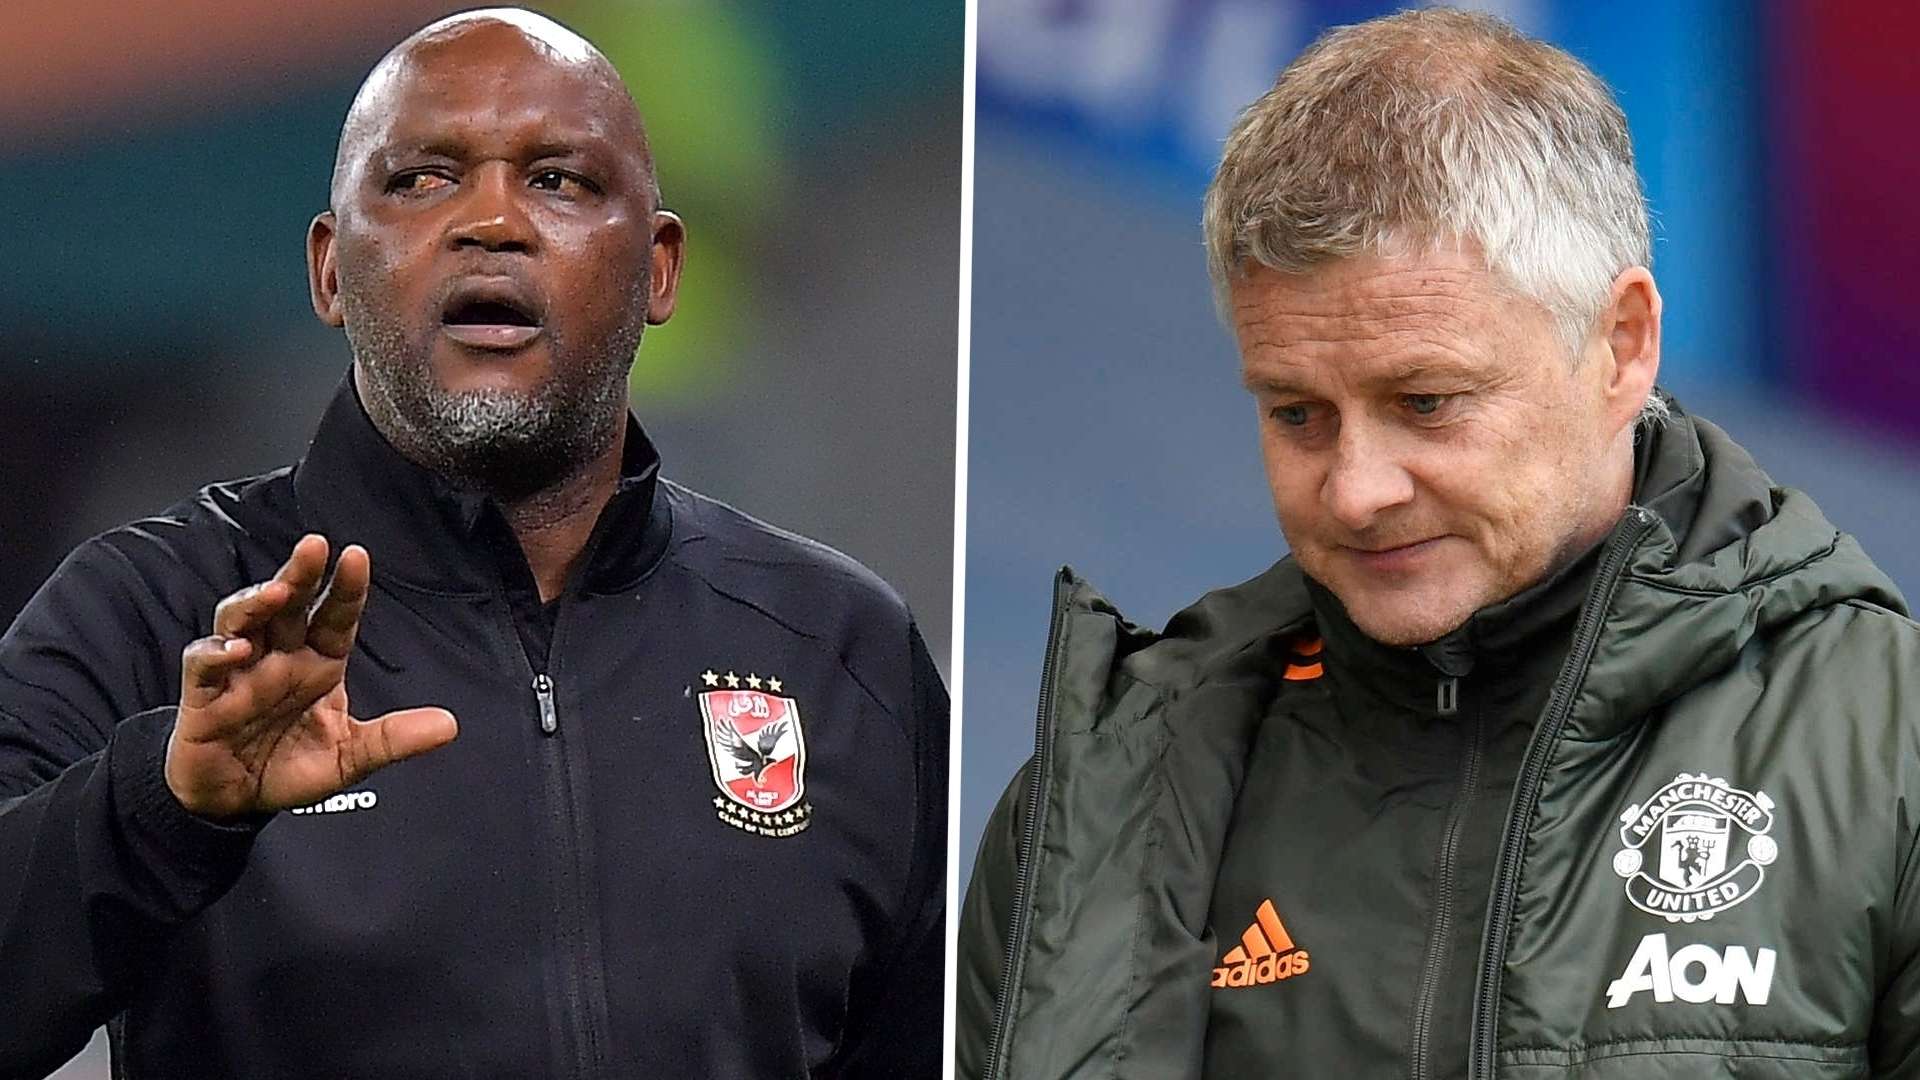 Pitso Mosimane of Al Ahly and Ole Gunnar Solskjaer of Manchester United.